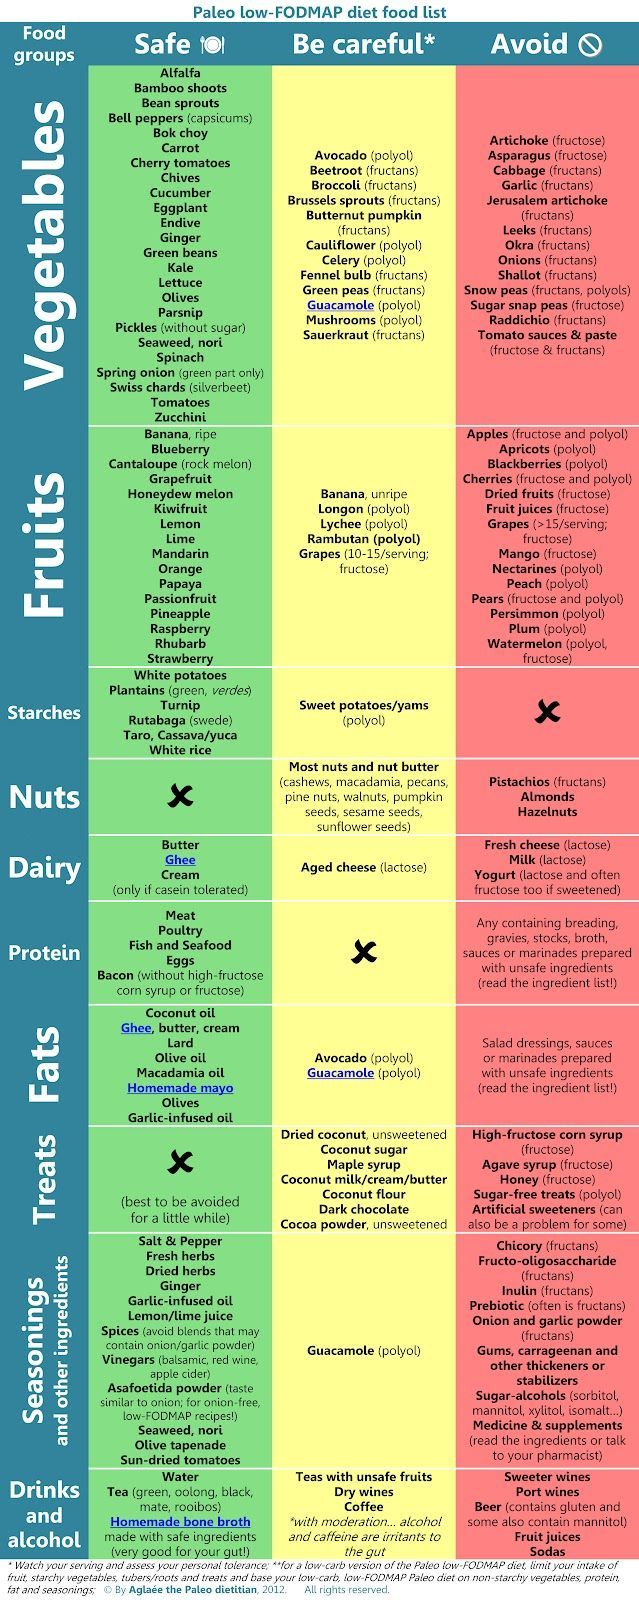 Modifying Paleo for FODMAP-Intolerance (a.k.a. Fructose Malabsorption)